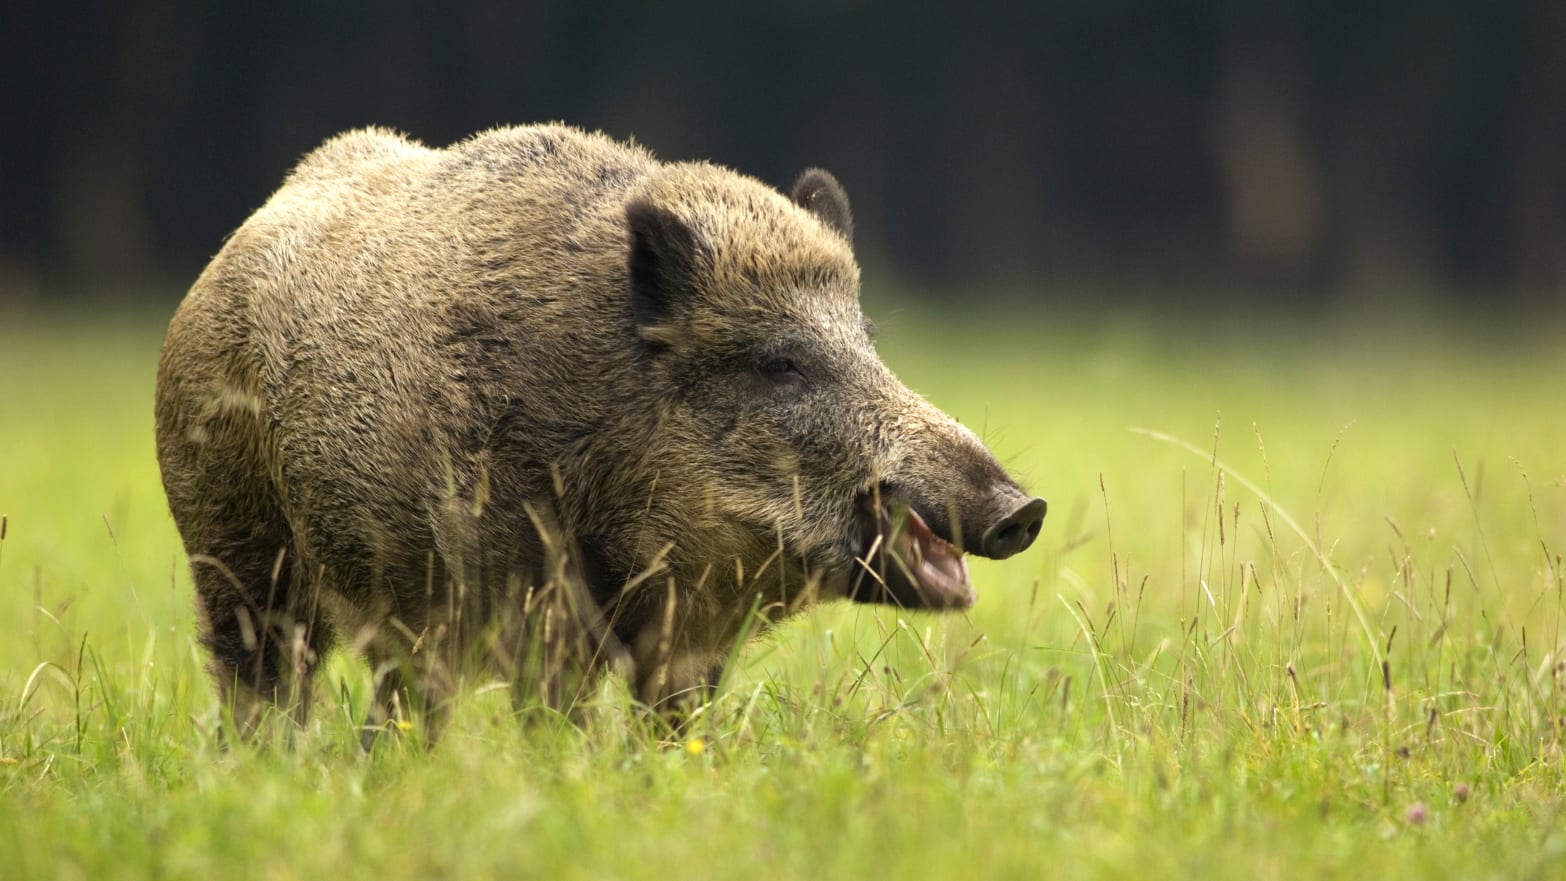 A shaggy wild boar stands stoically in a field of green grass